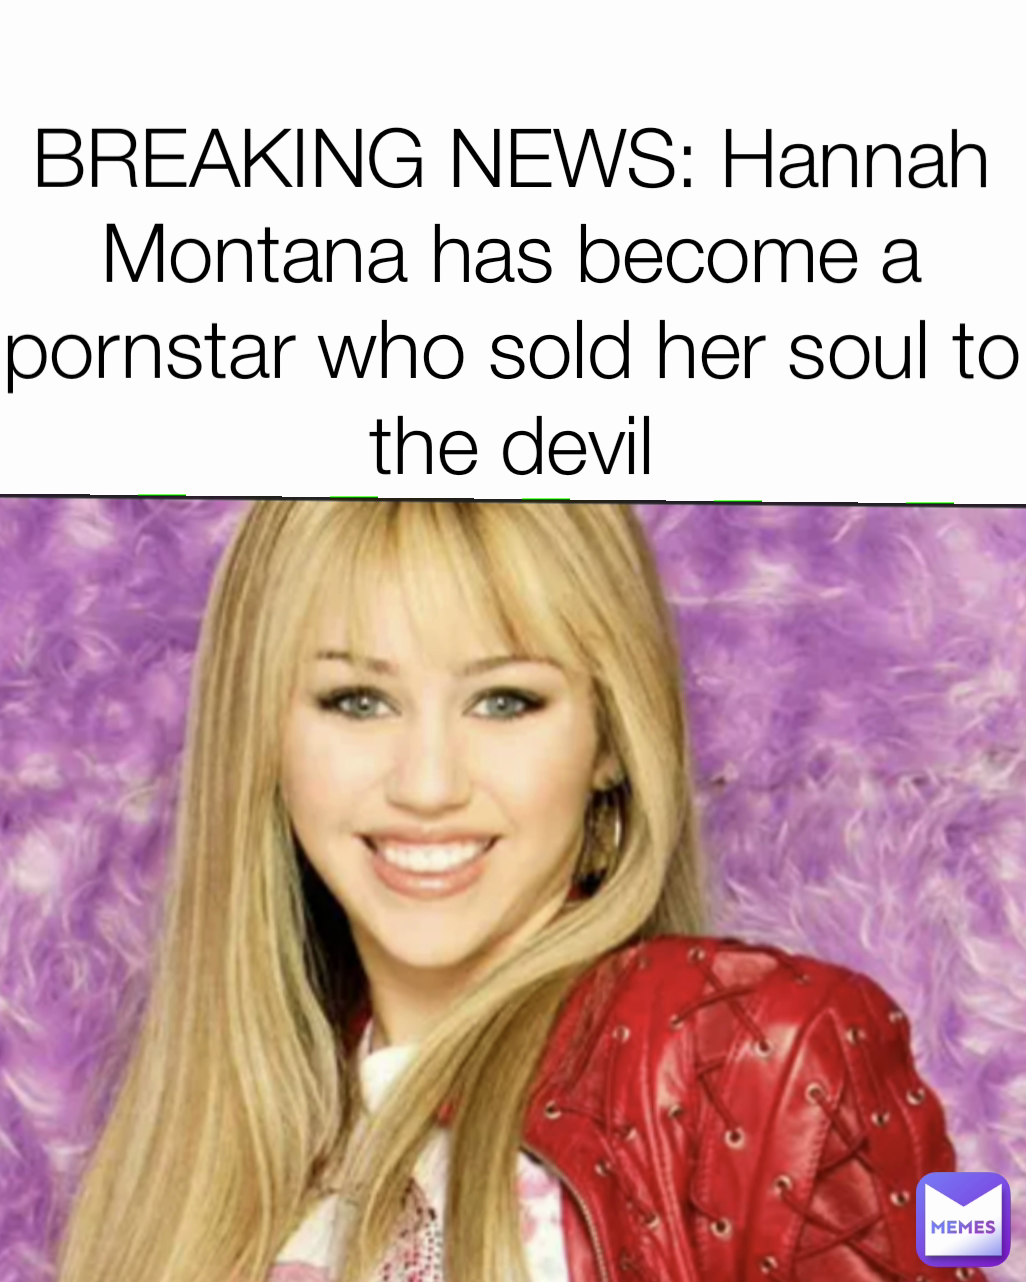 BREAKING NEWS: Hannah Montana has become a pornstar who sold her soul to the devil